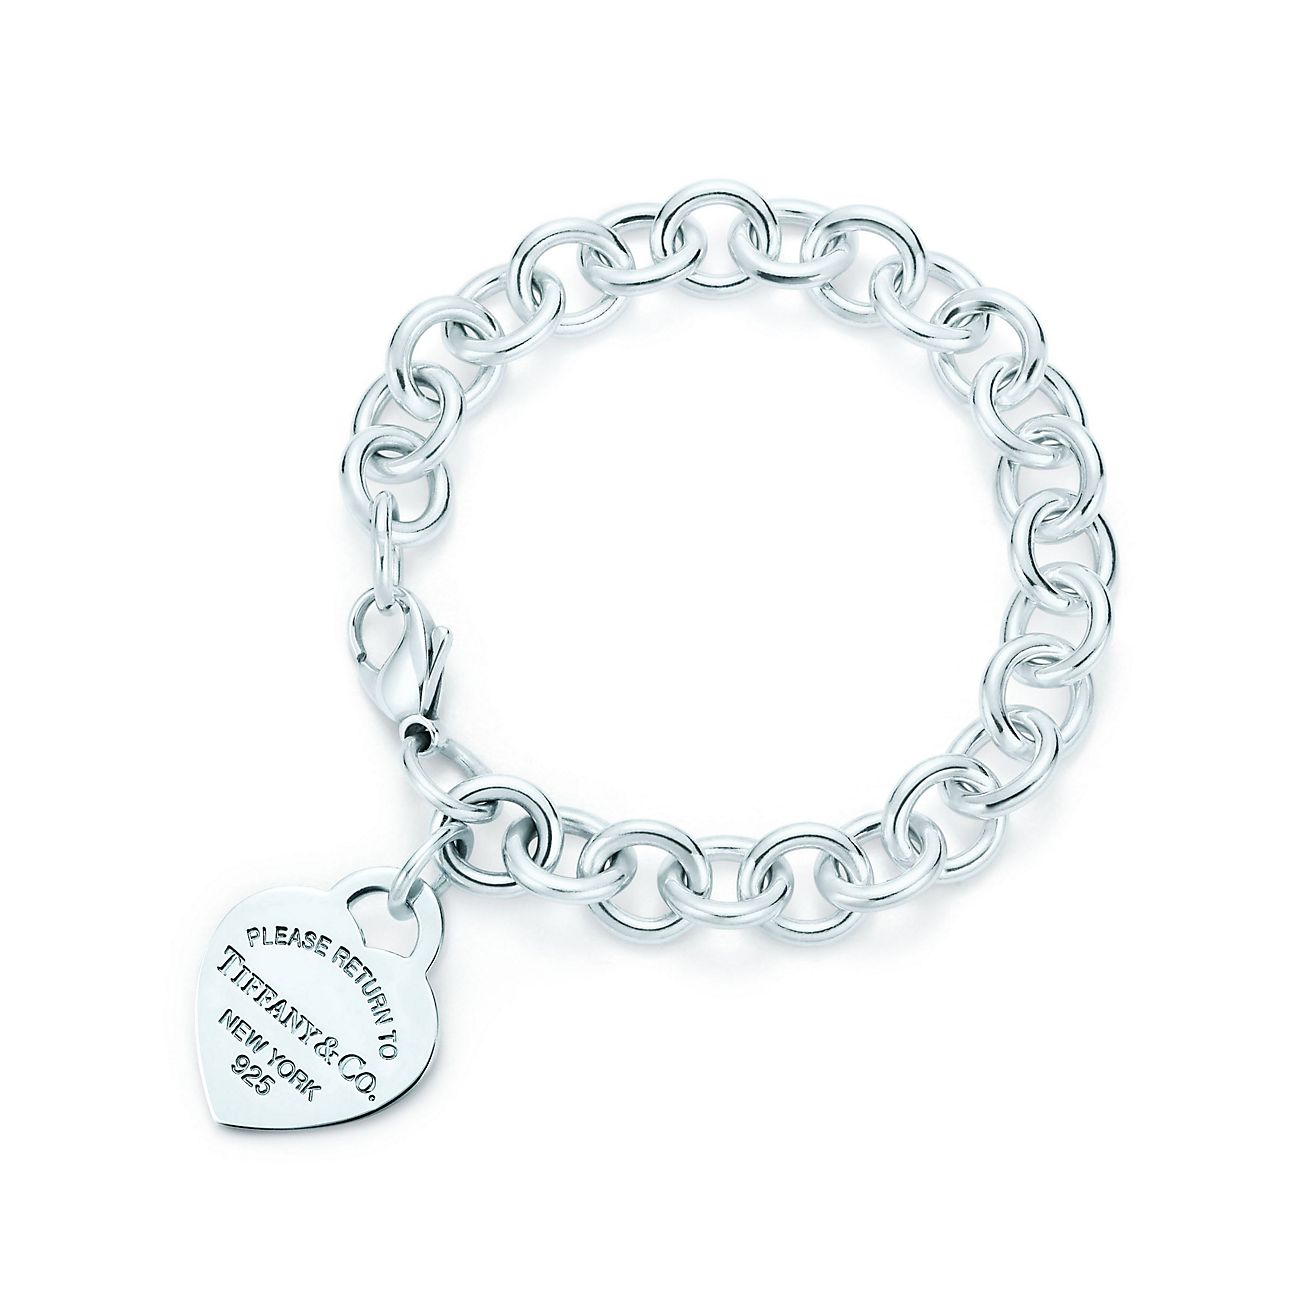 Heart Tag Charm Bracelet, $300 (plus $15 for engraving) at Tiffany & Co.